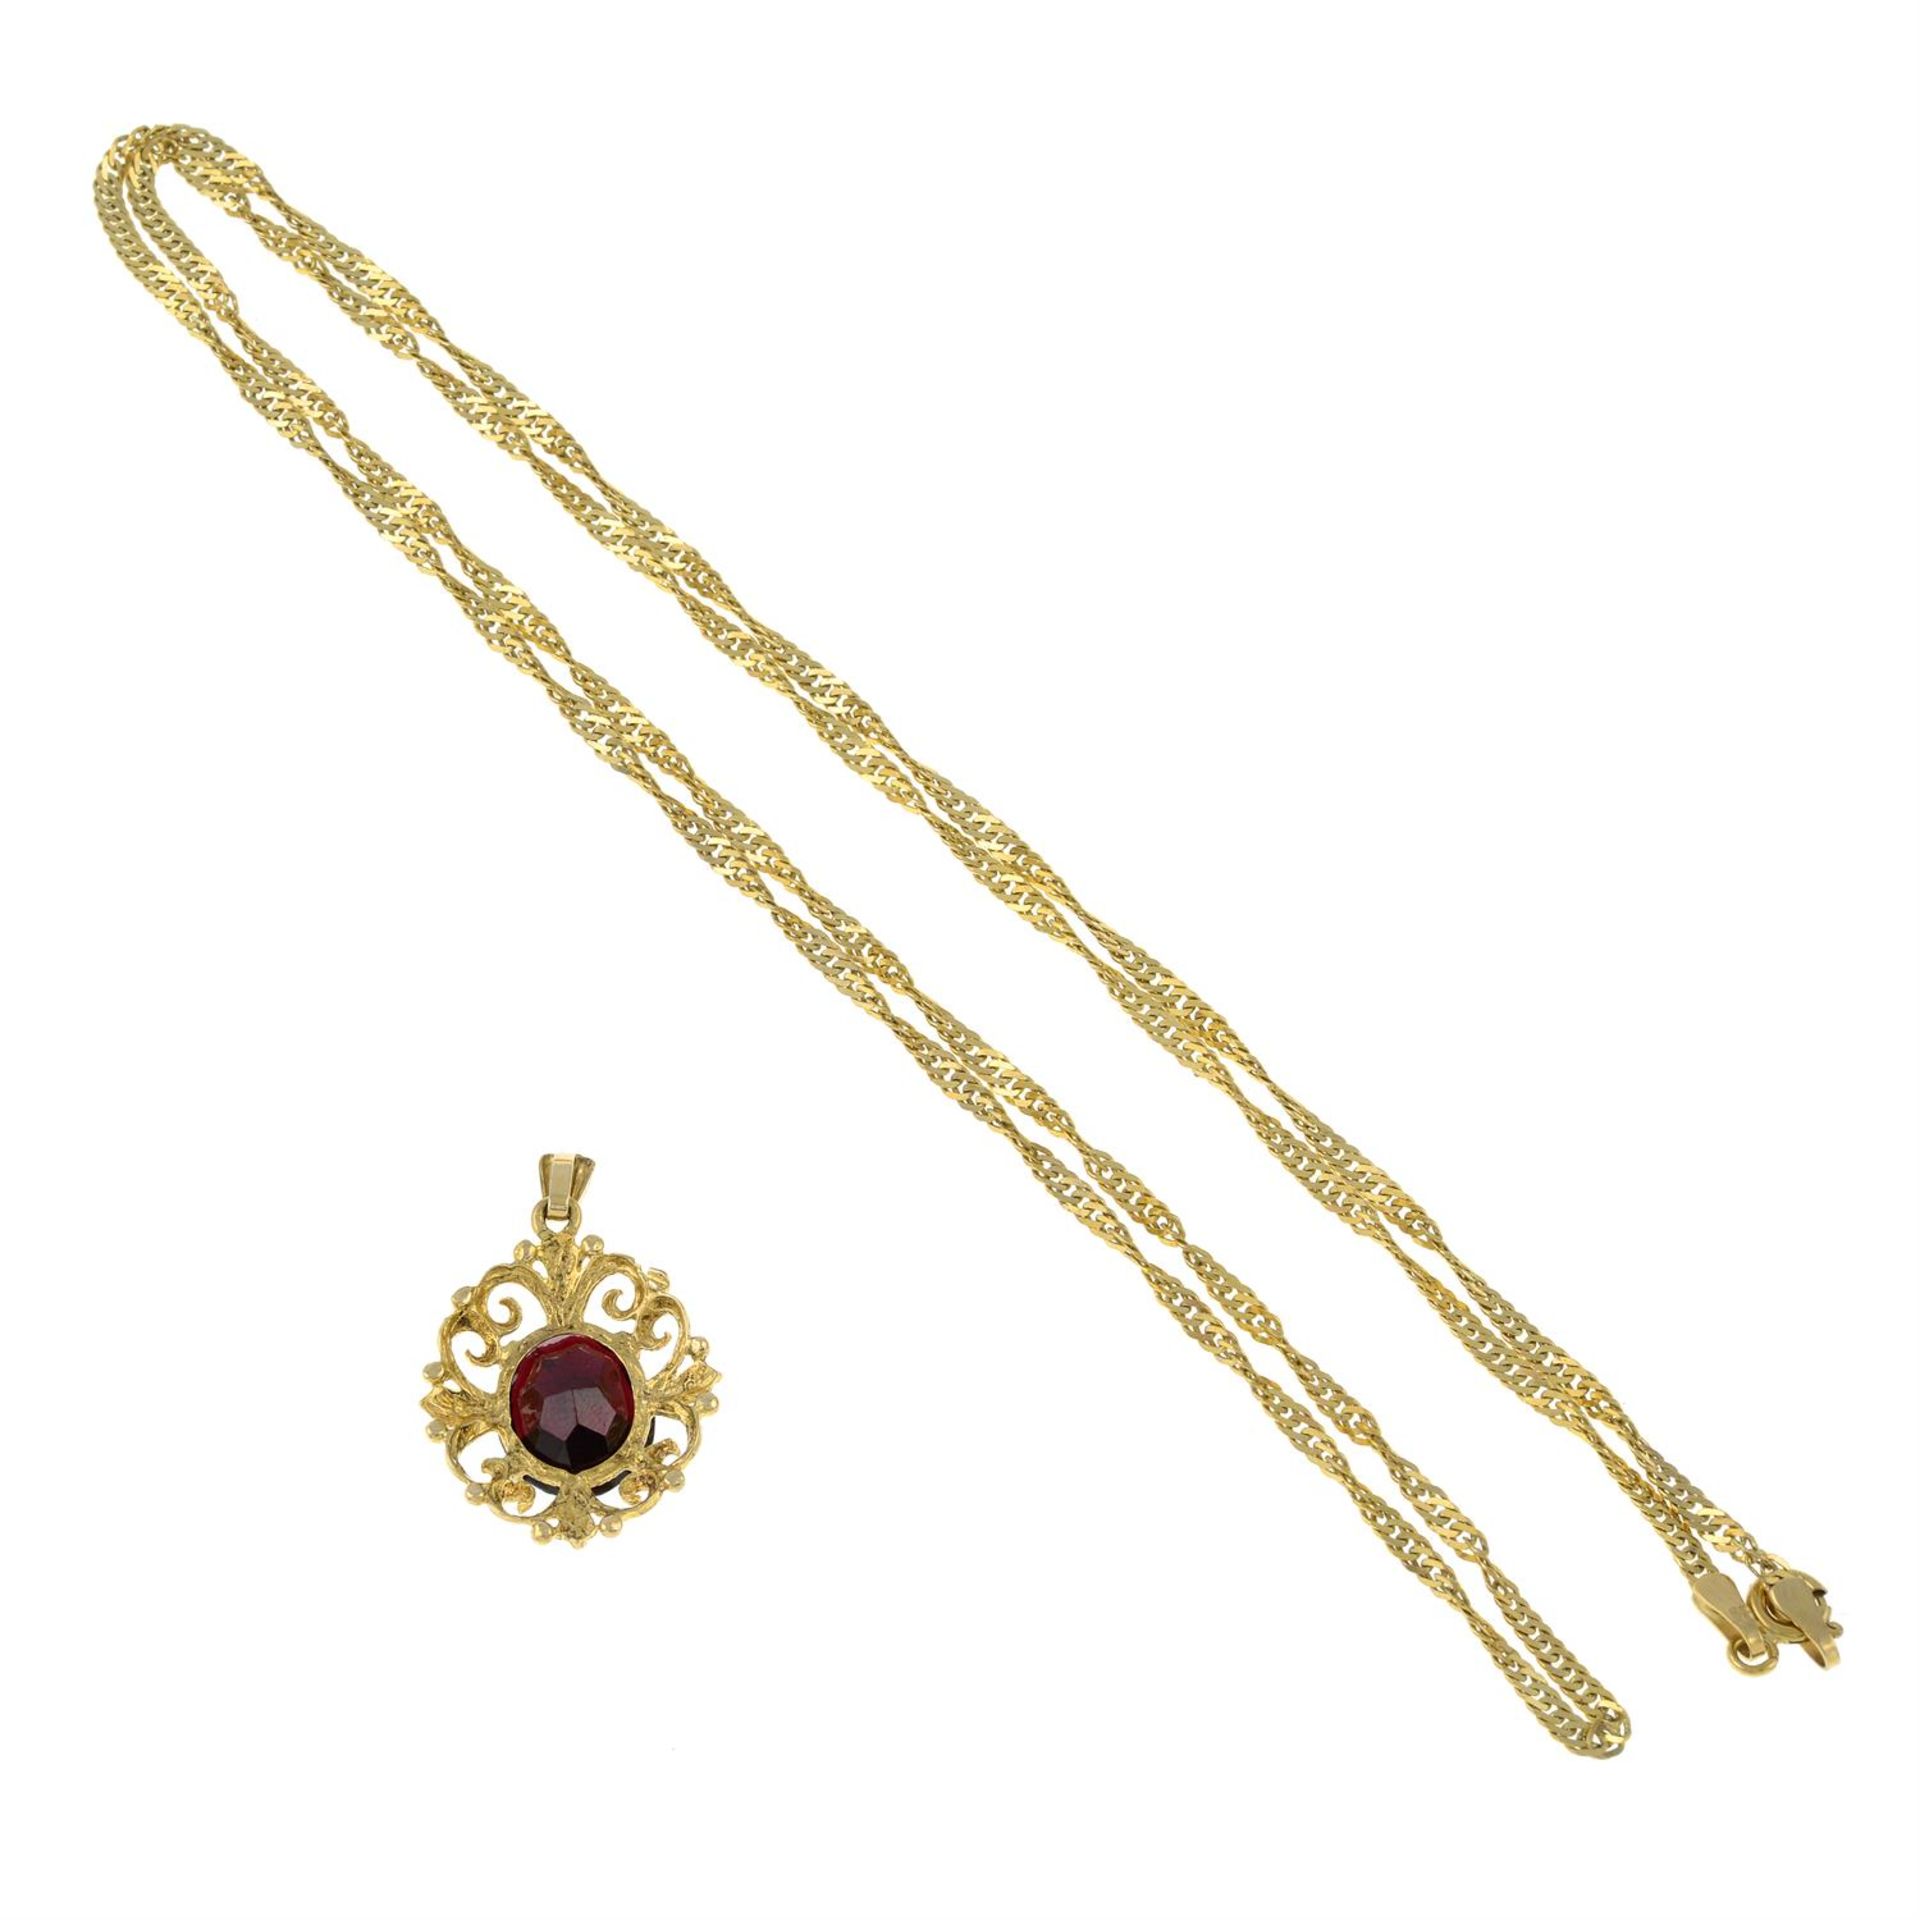 A 9ct gold garnet pendant, with a 9ct gold chain. - Image 2 of 2